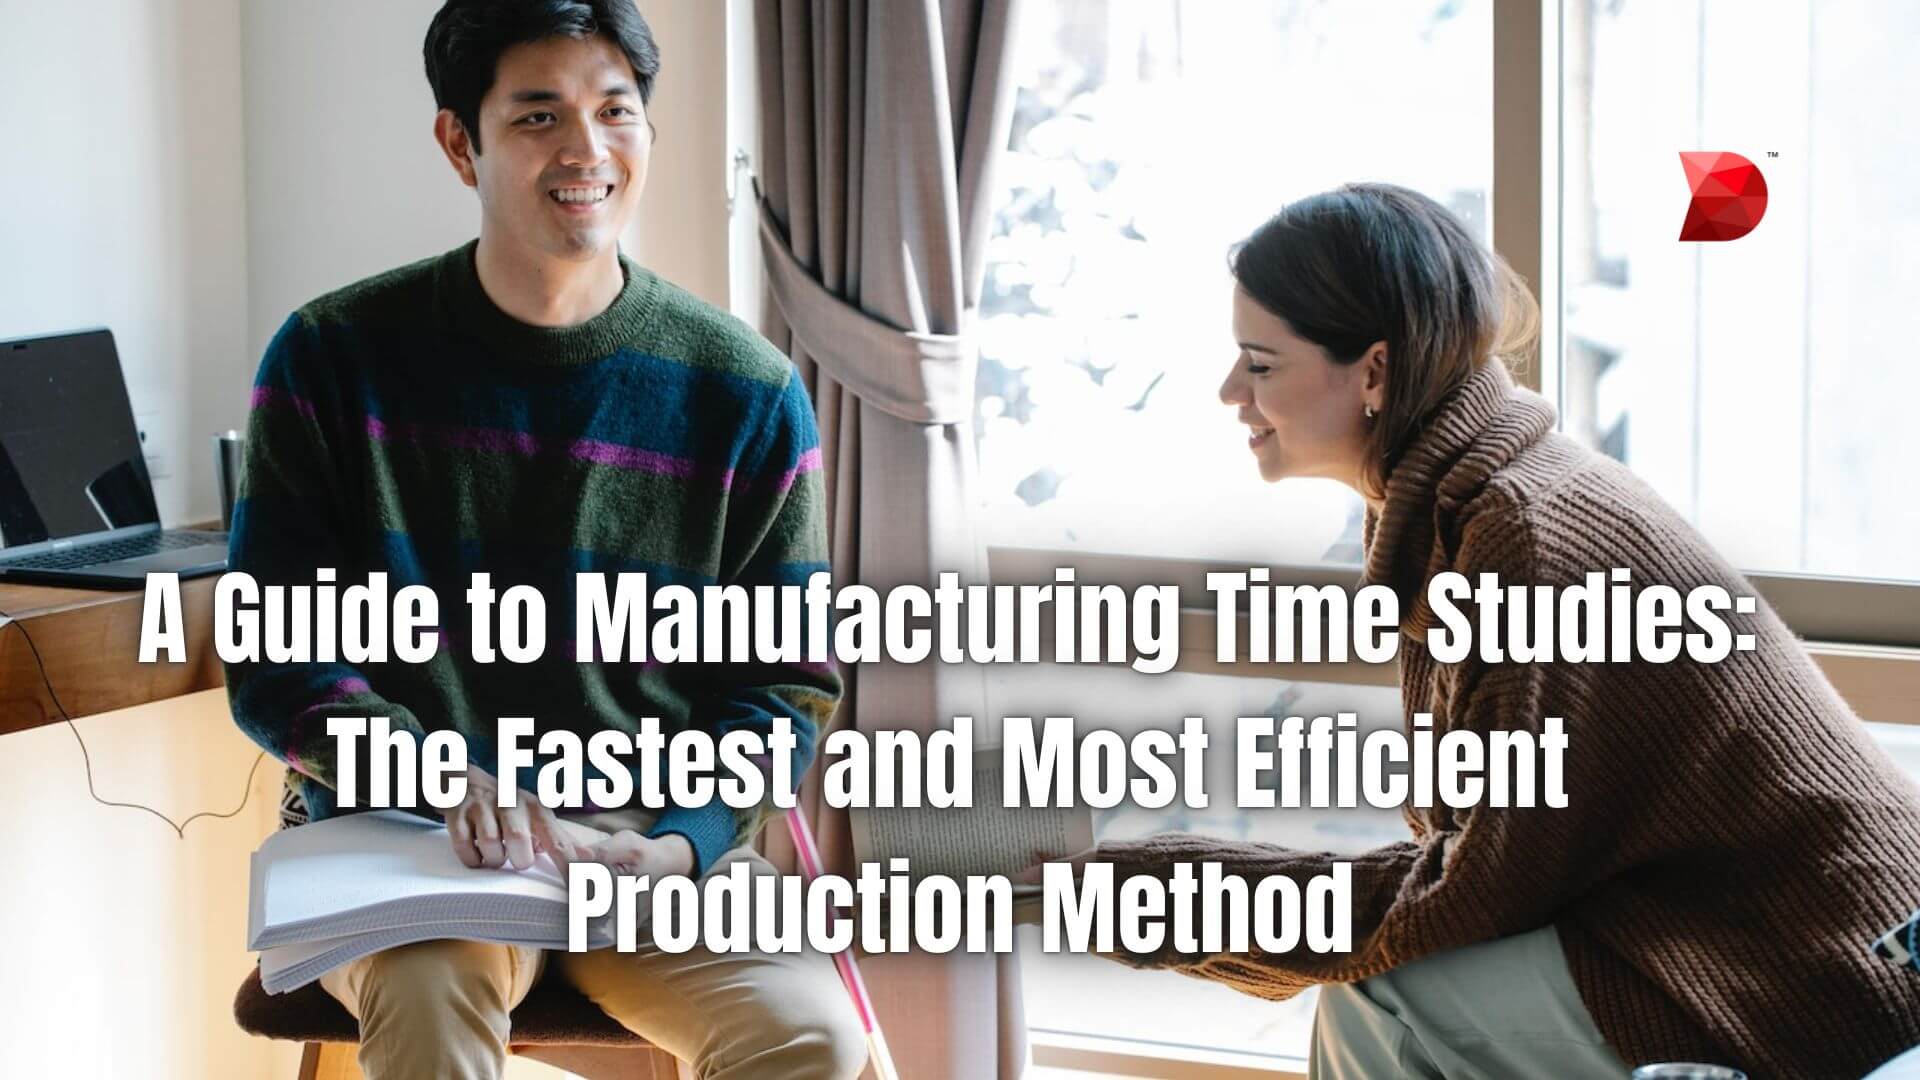 A Guide to Manufacturing Time Studies The Fastest and Most Efficient Production Method